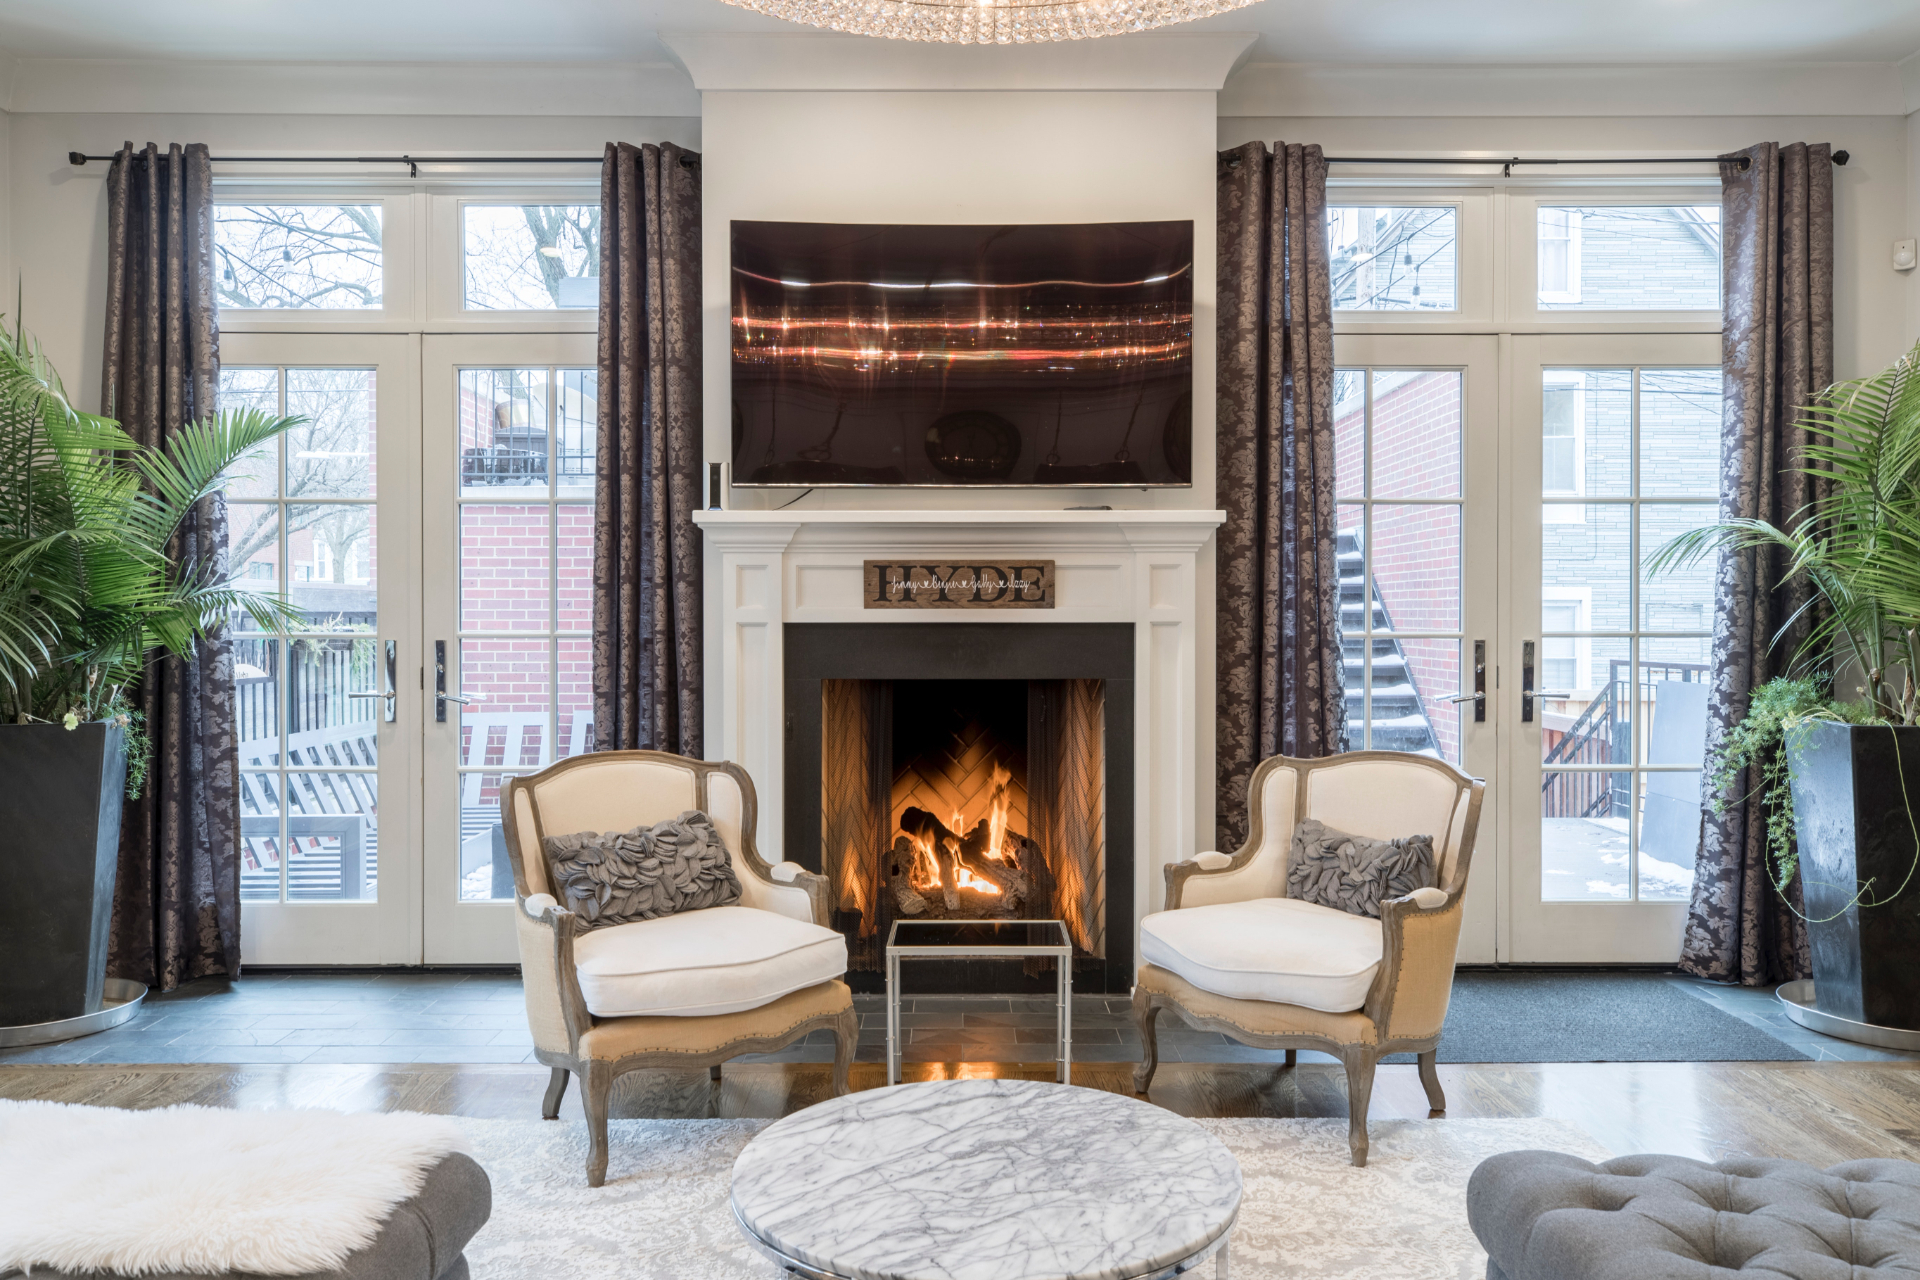 How are Victorian fireplaces restored